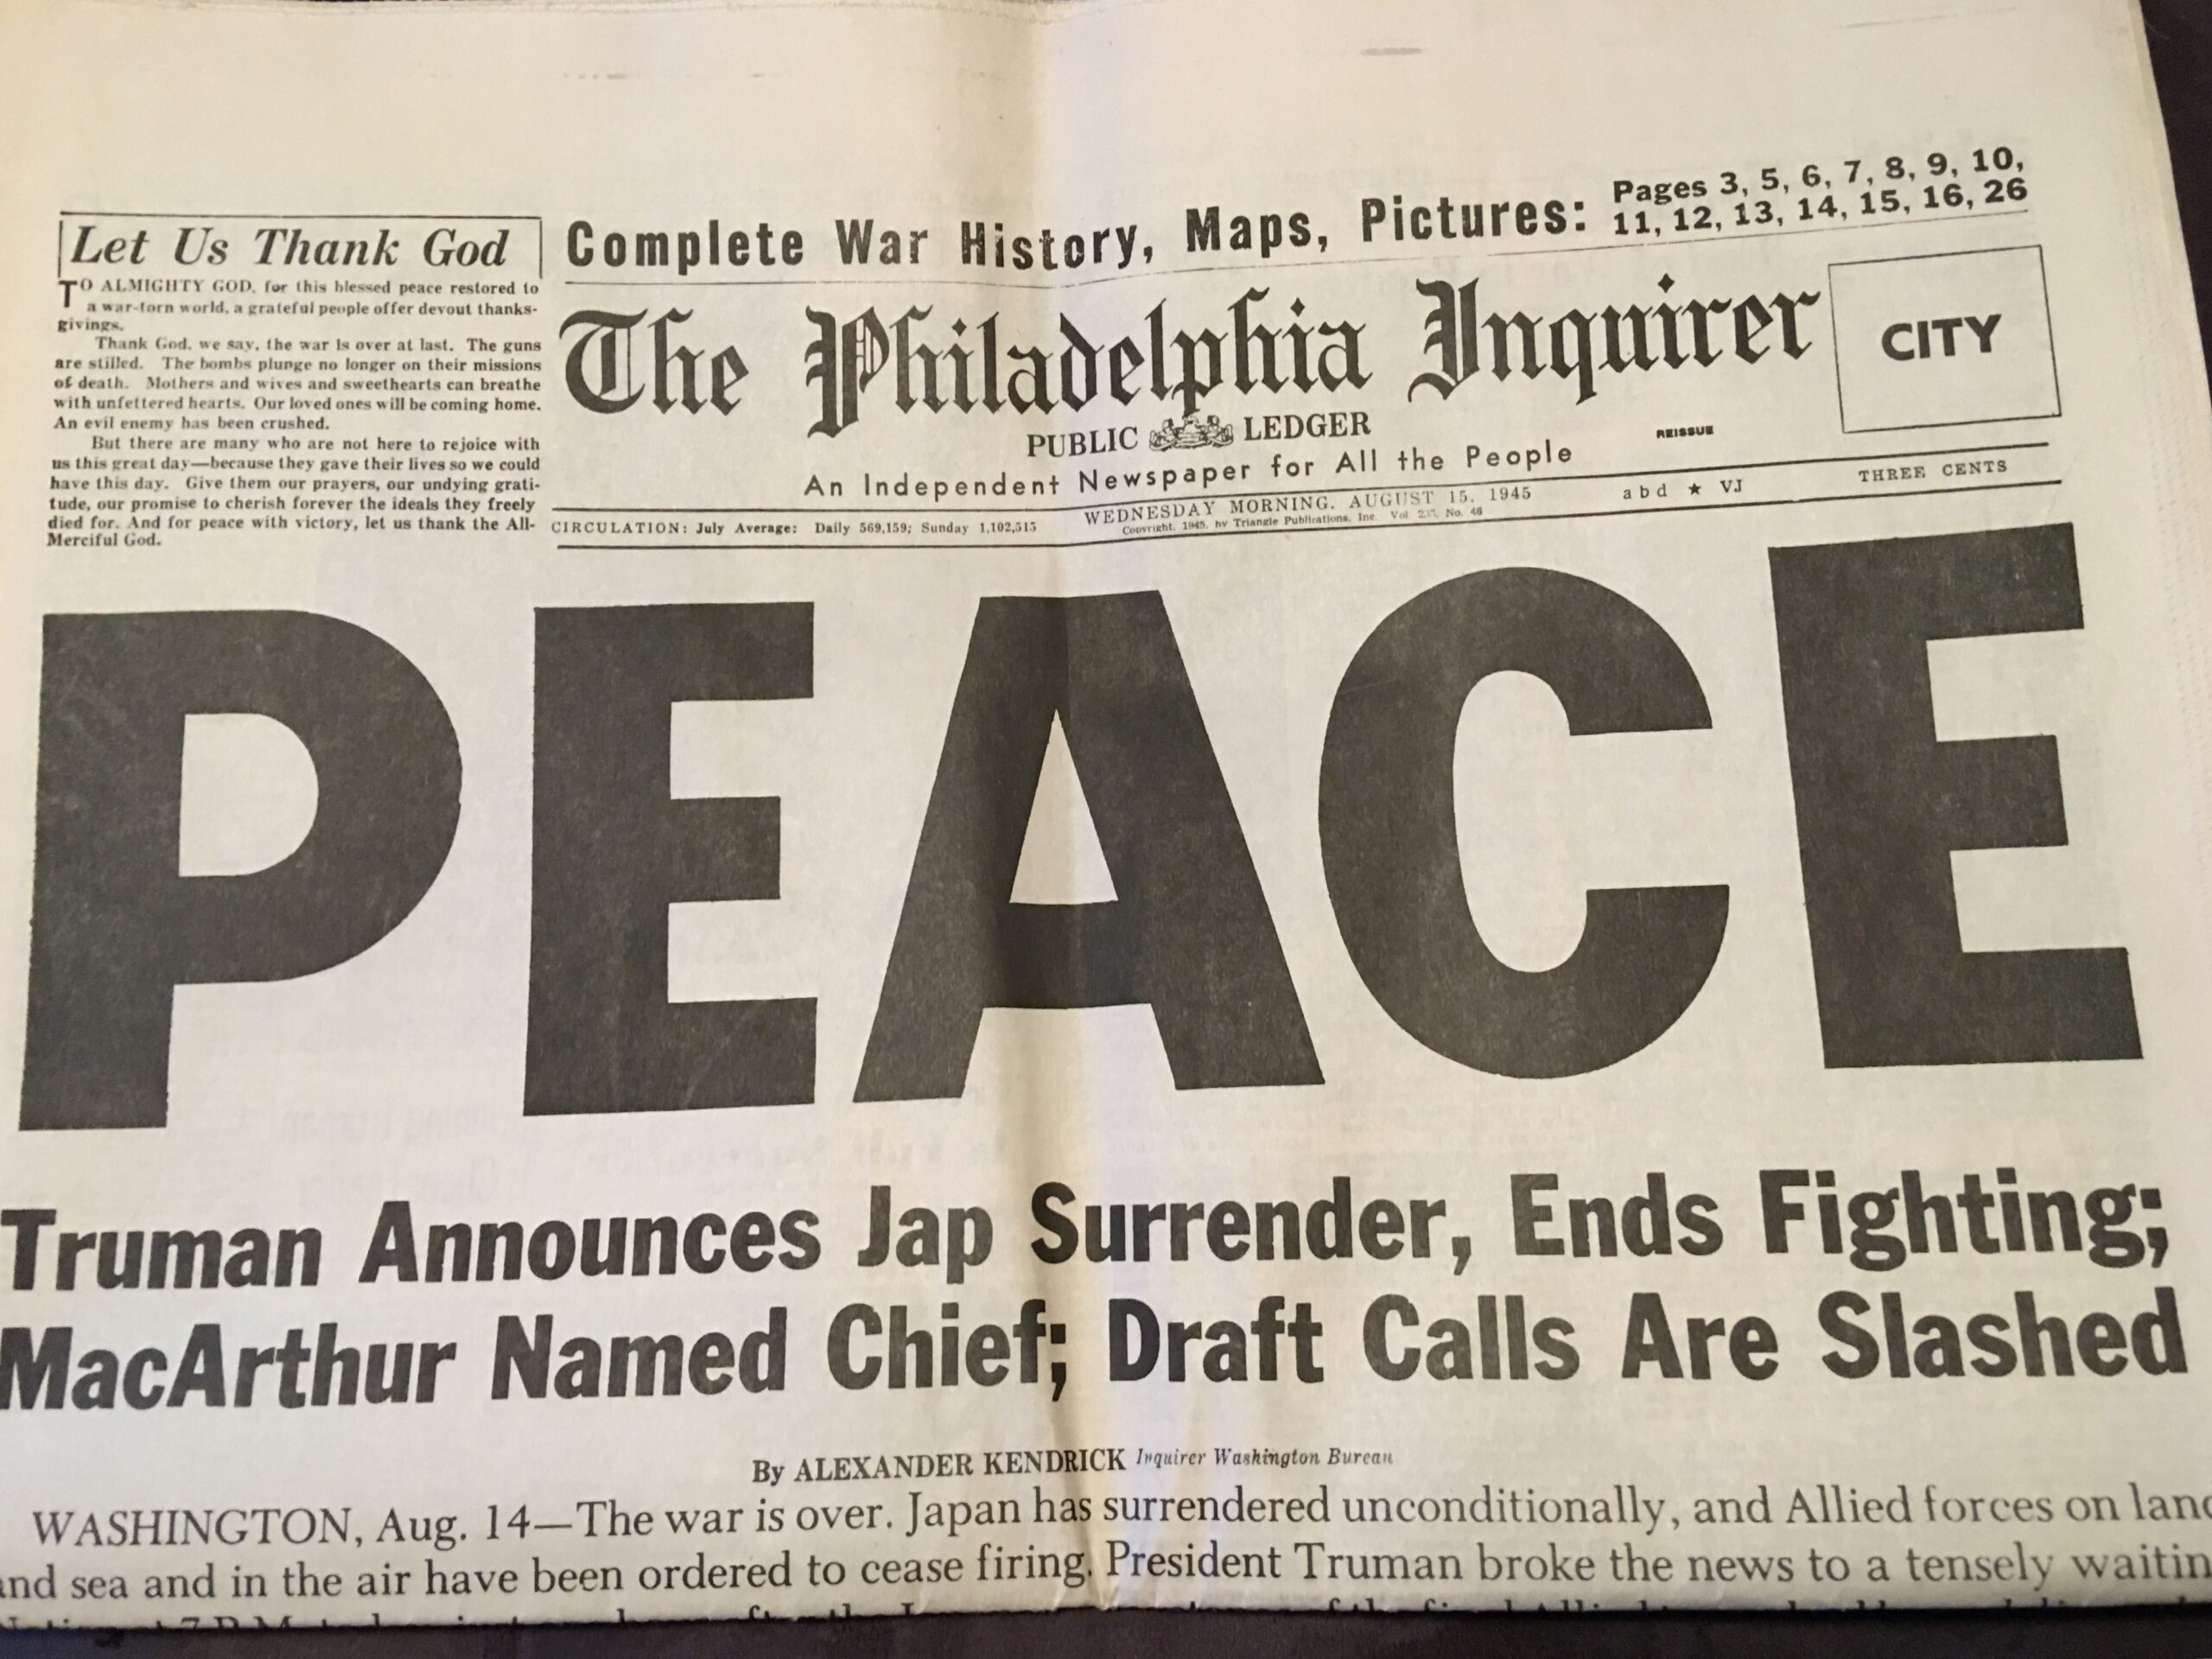 Newspaper front page declaring end of WWII - Philadelphia Inquirer